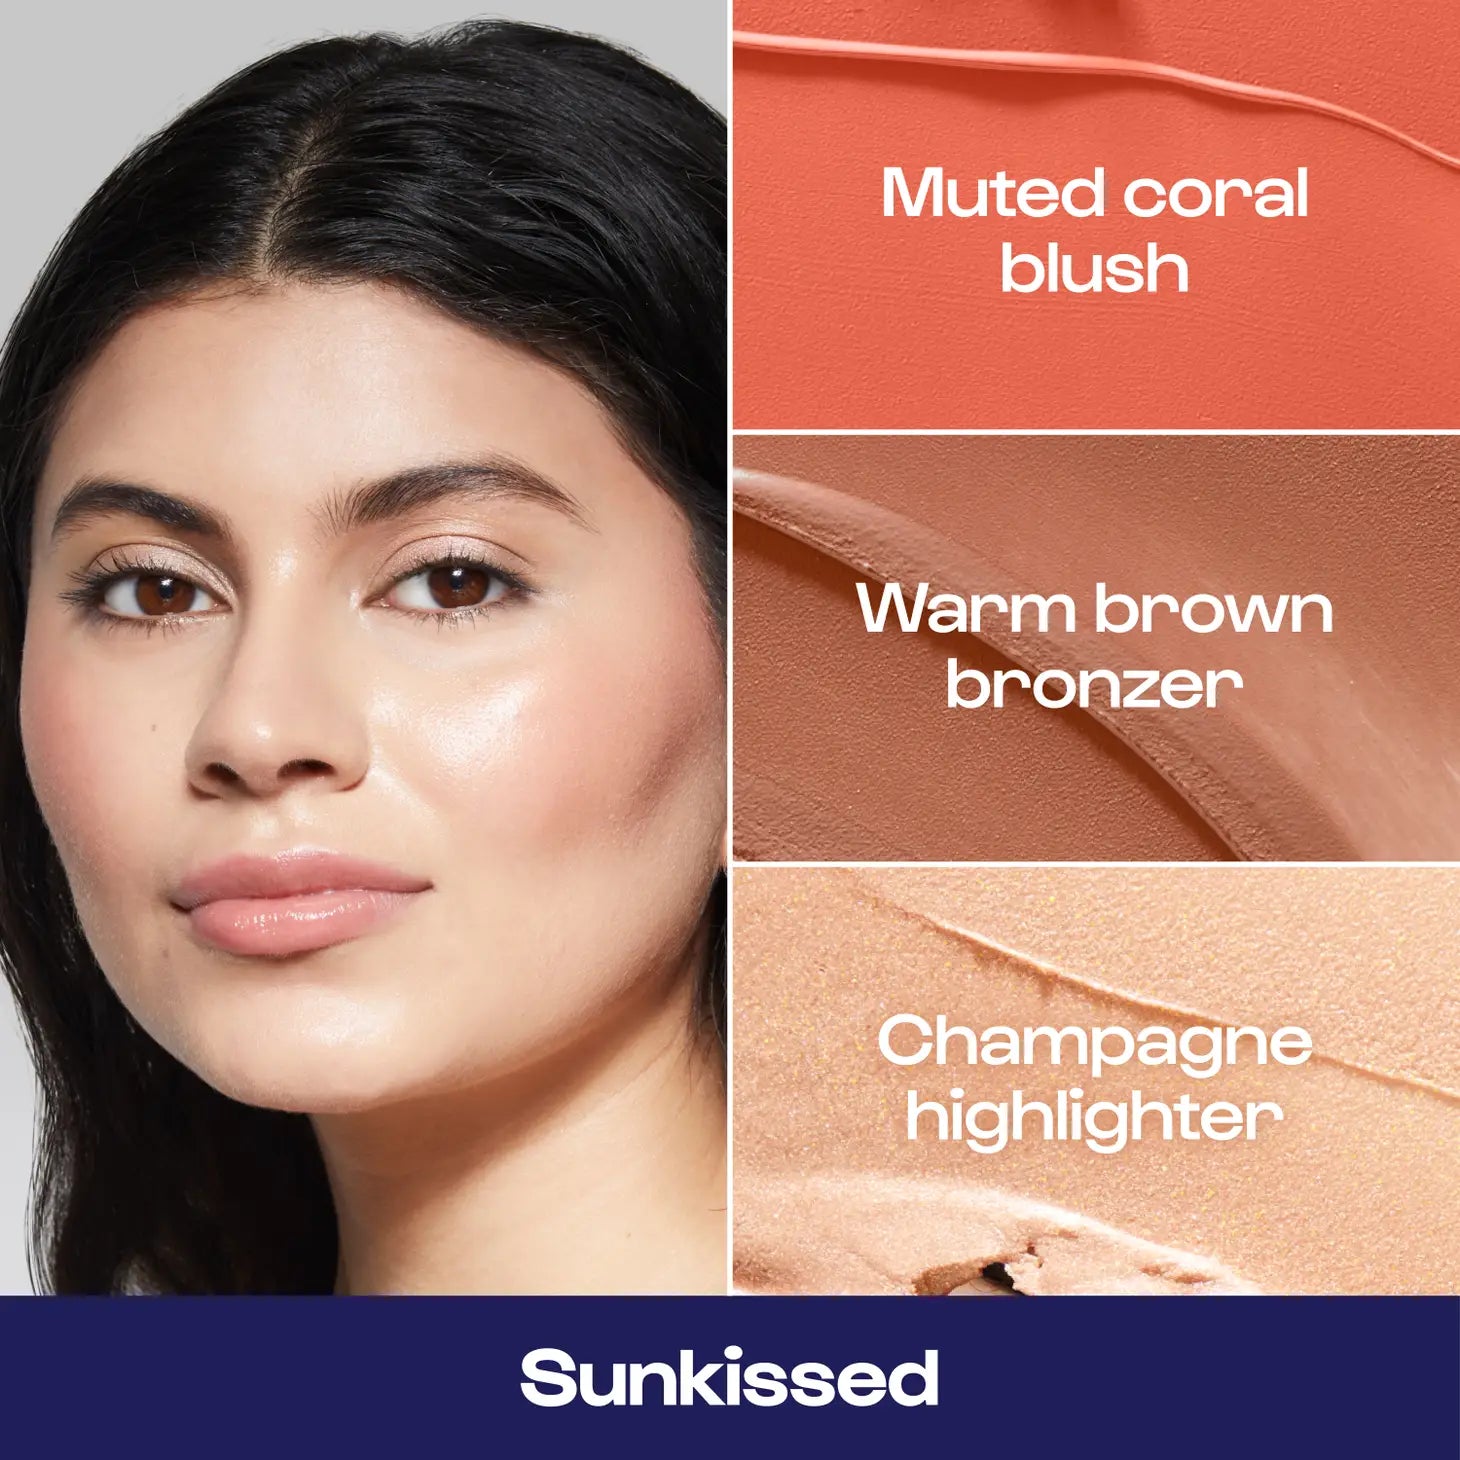 Stack The Odds Blush/Bronzer/Highlighter - Sunkissed